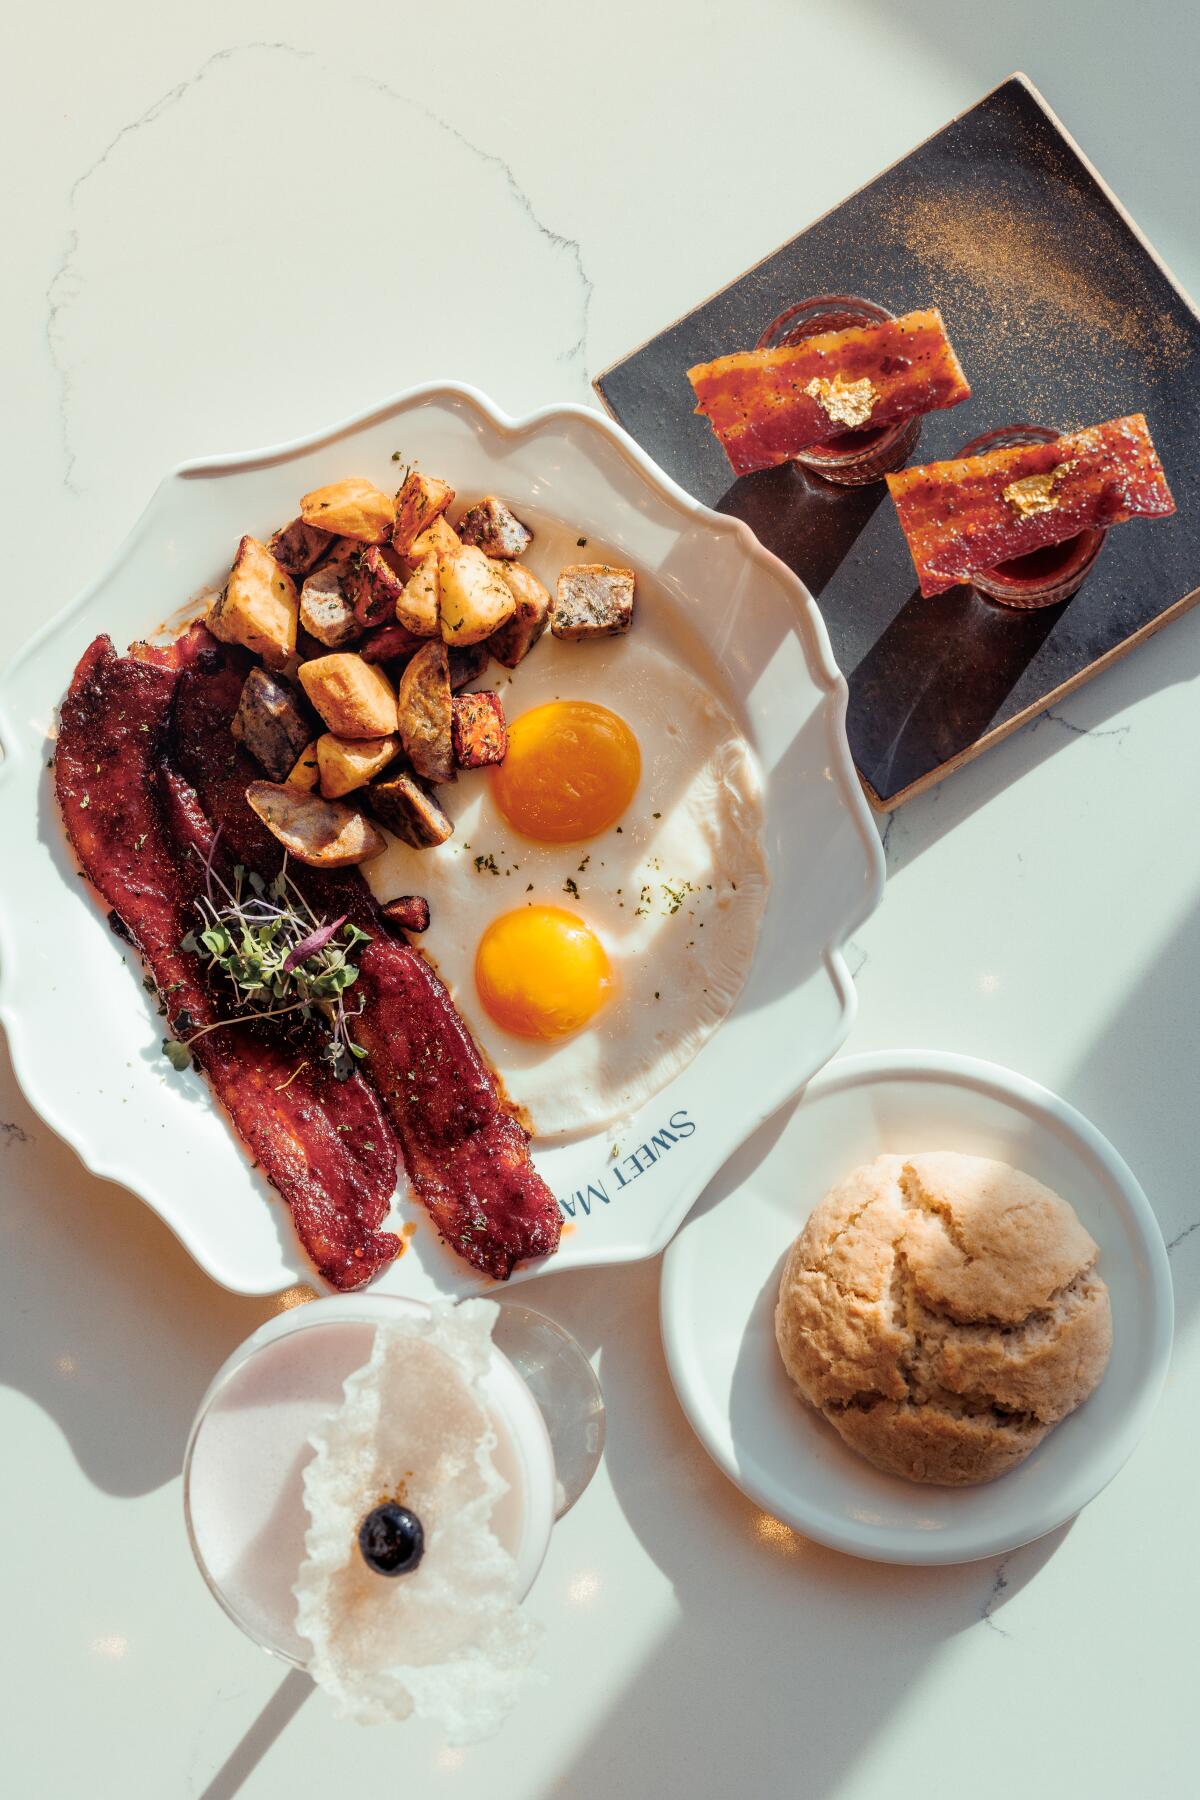 Brunch classics and "Billionaire's Bacon" have arrived in Santa Monica via the Bay Area's popular chain Sweet Maple.